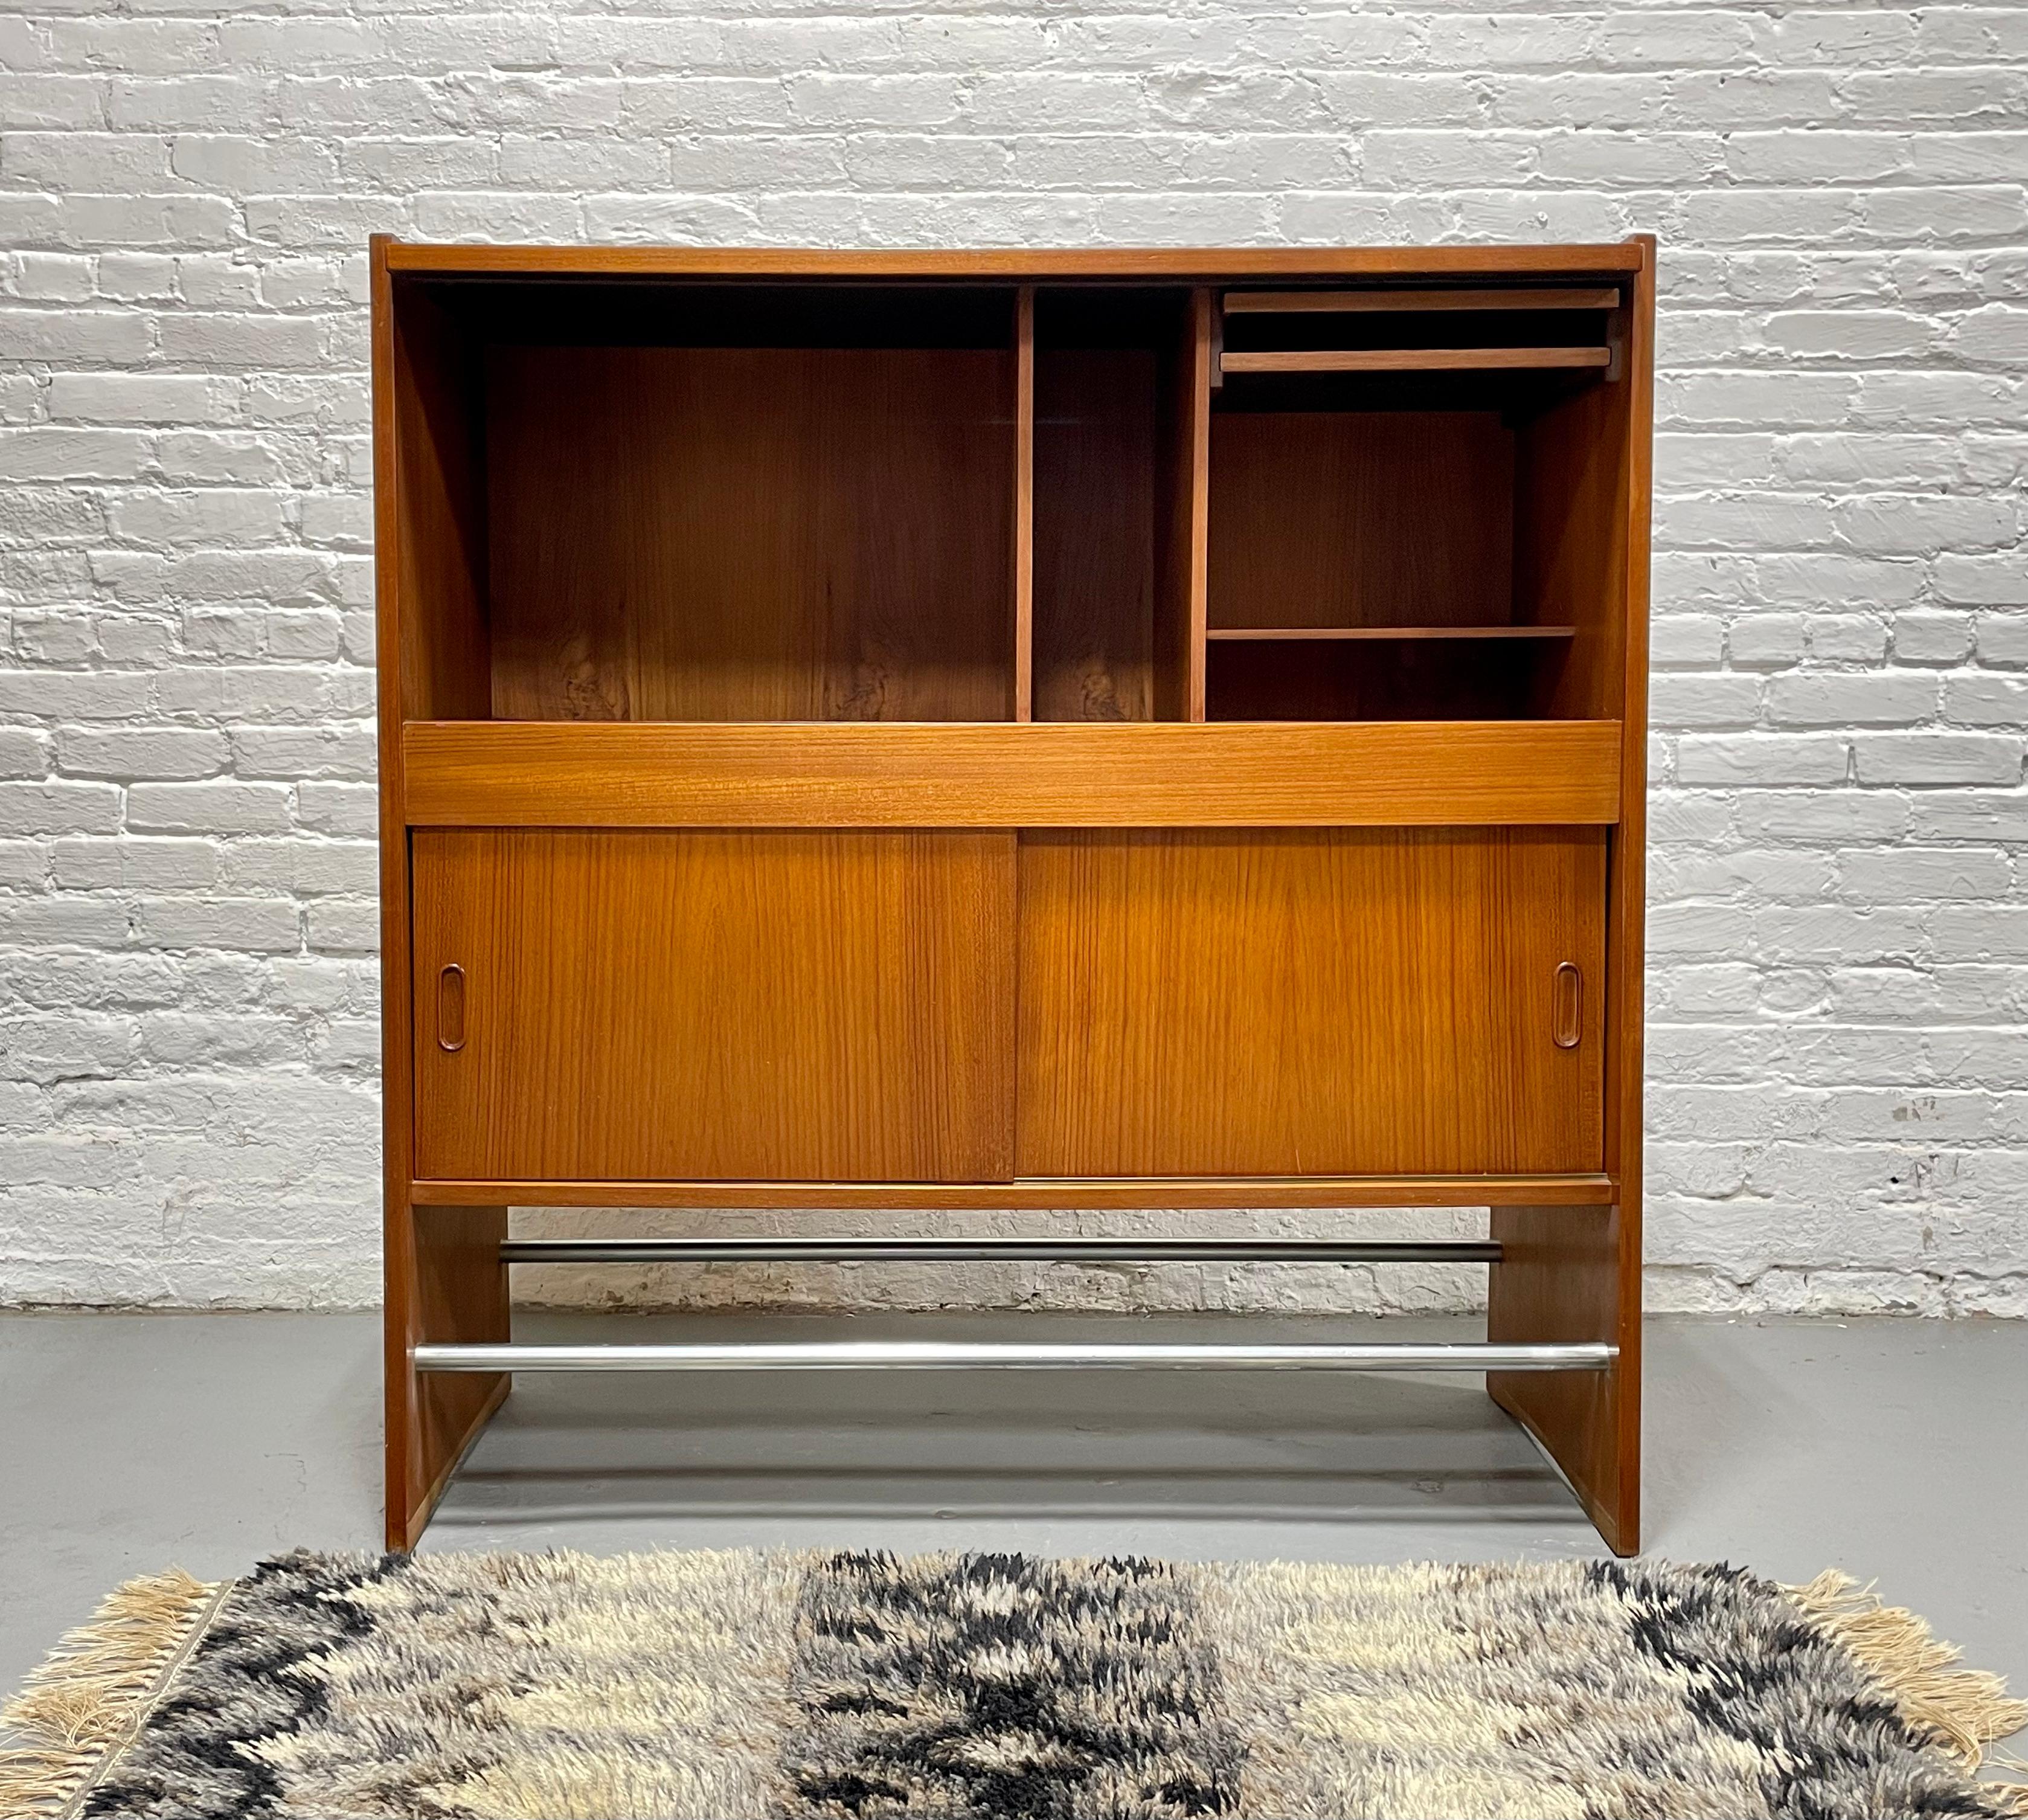 Danish Mid Century Modern Teak Dry Bar attributed to Erik Buch, c. 1960s.  One side features a finished teak side with gorgeous wood grains and a metal footrest for guests and the back offers storage for eight wine bottles, a pullout shelf for ice